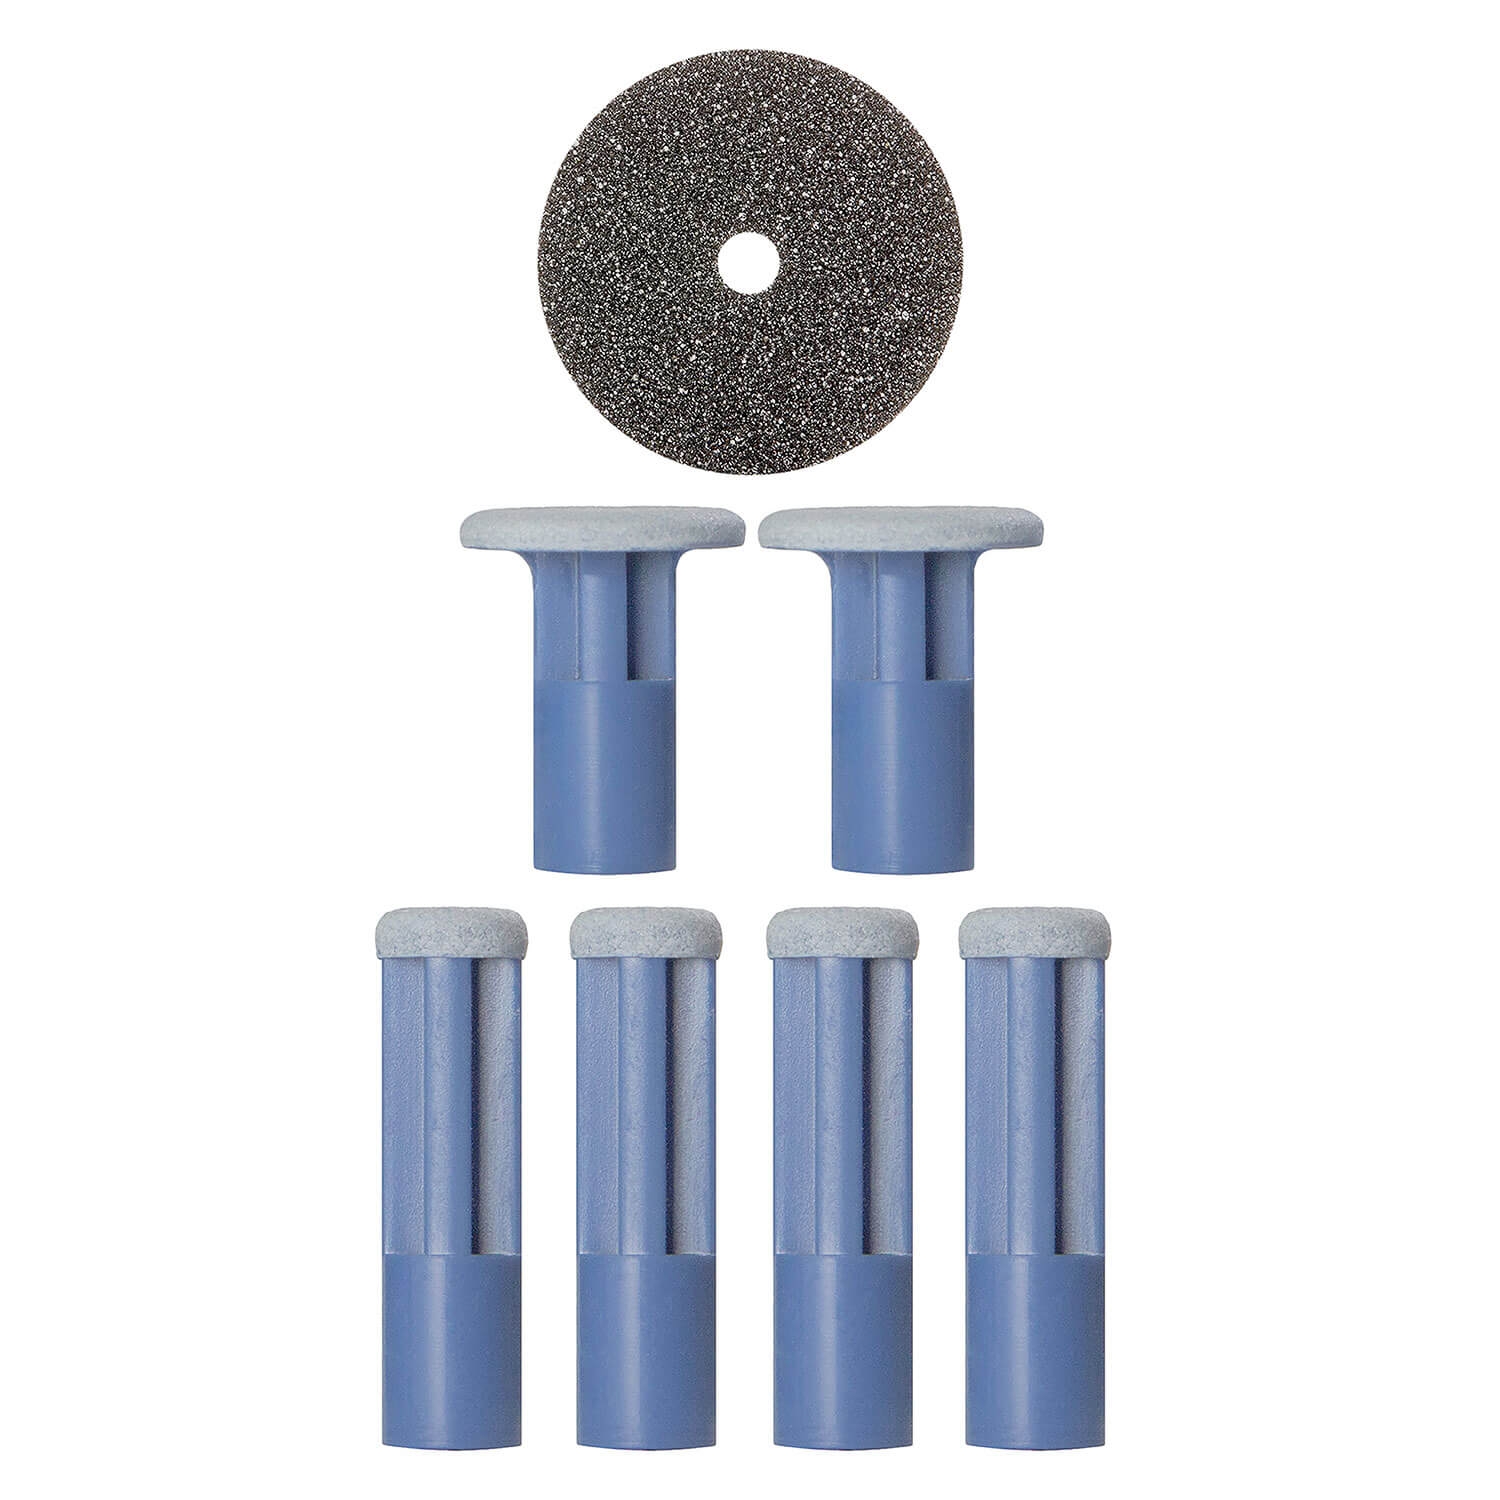 Product image from pmd - Replacement Discs Sensitive